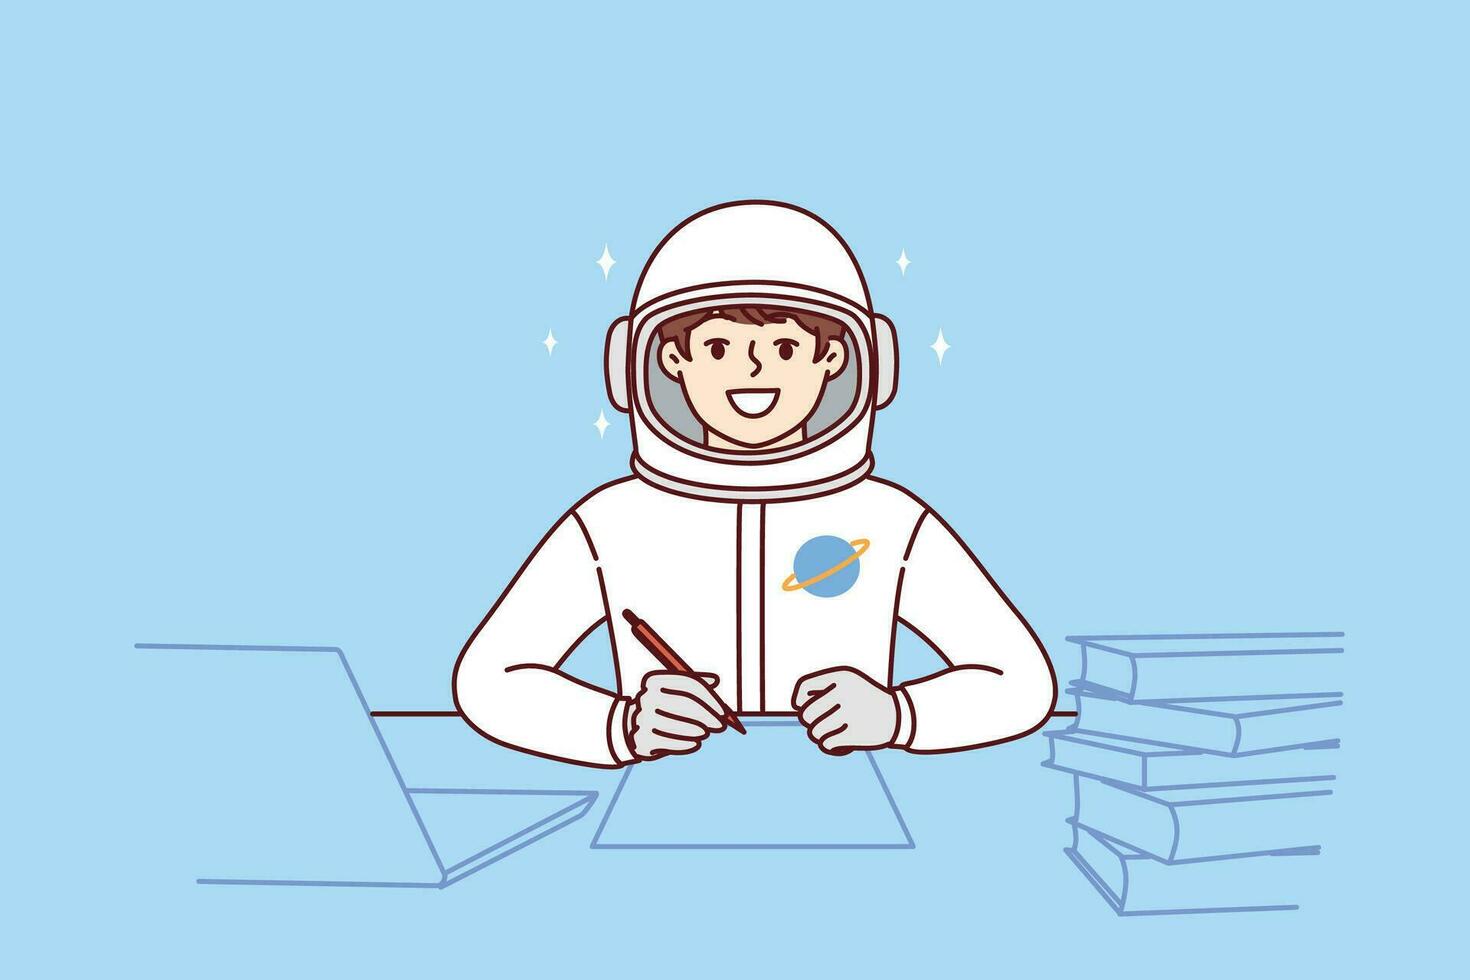 Boy astronaut does homework sitting at table with books, dressed in spacesuit for flight into space vector